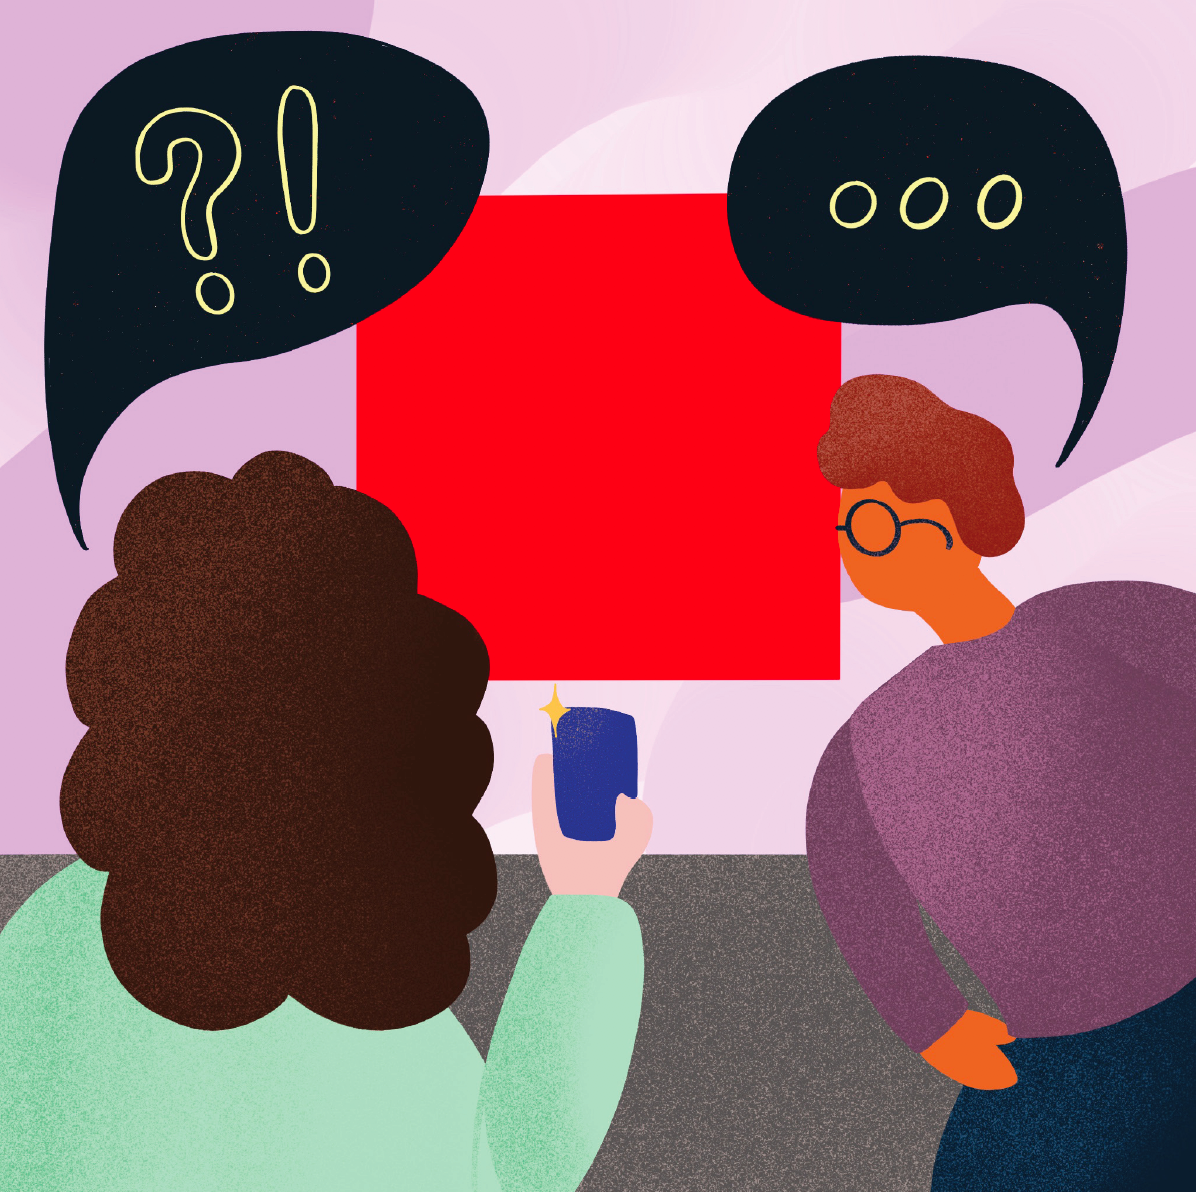 Image Credit: Vanessa Low
Image description: a colourful illustration of two people in foreground looking at an artwork in the background. One is taking a photo on their phone, while both have speech bubbles above their heads filled with question and exclamation marks